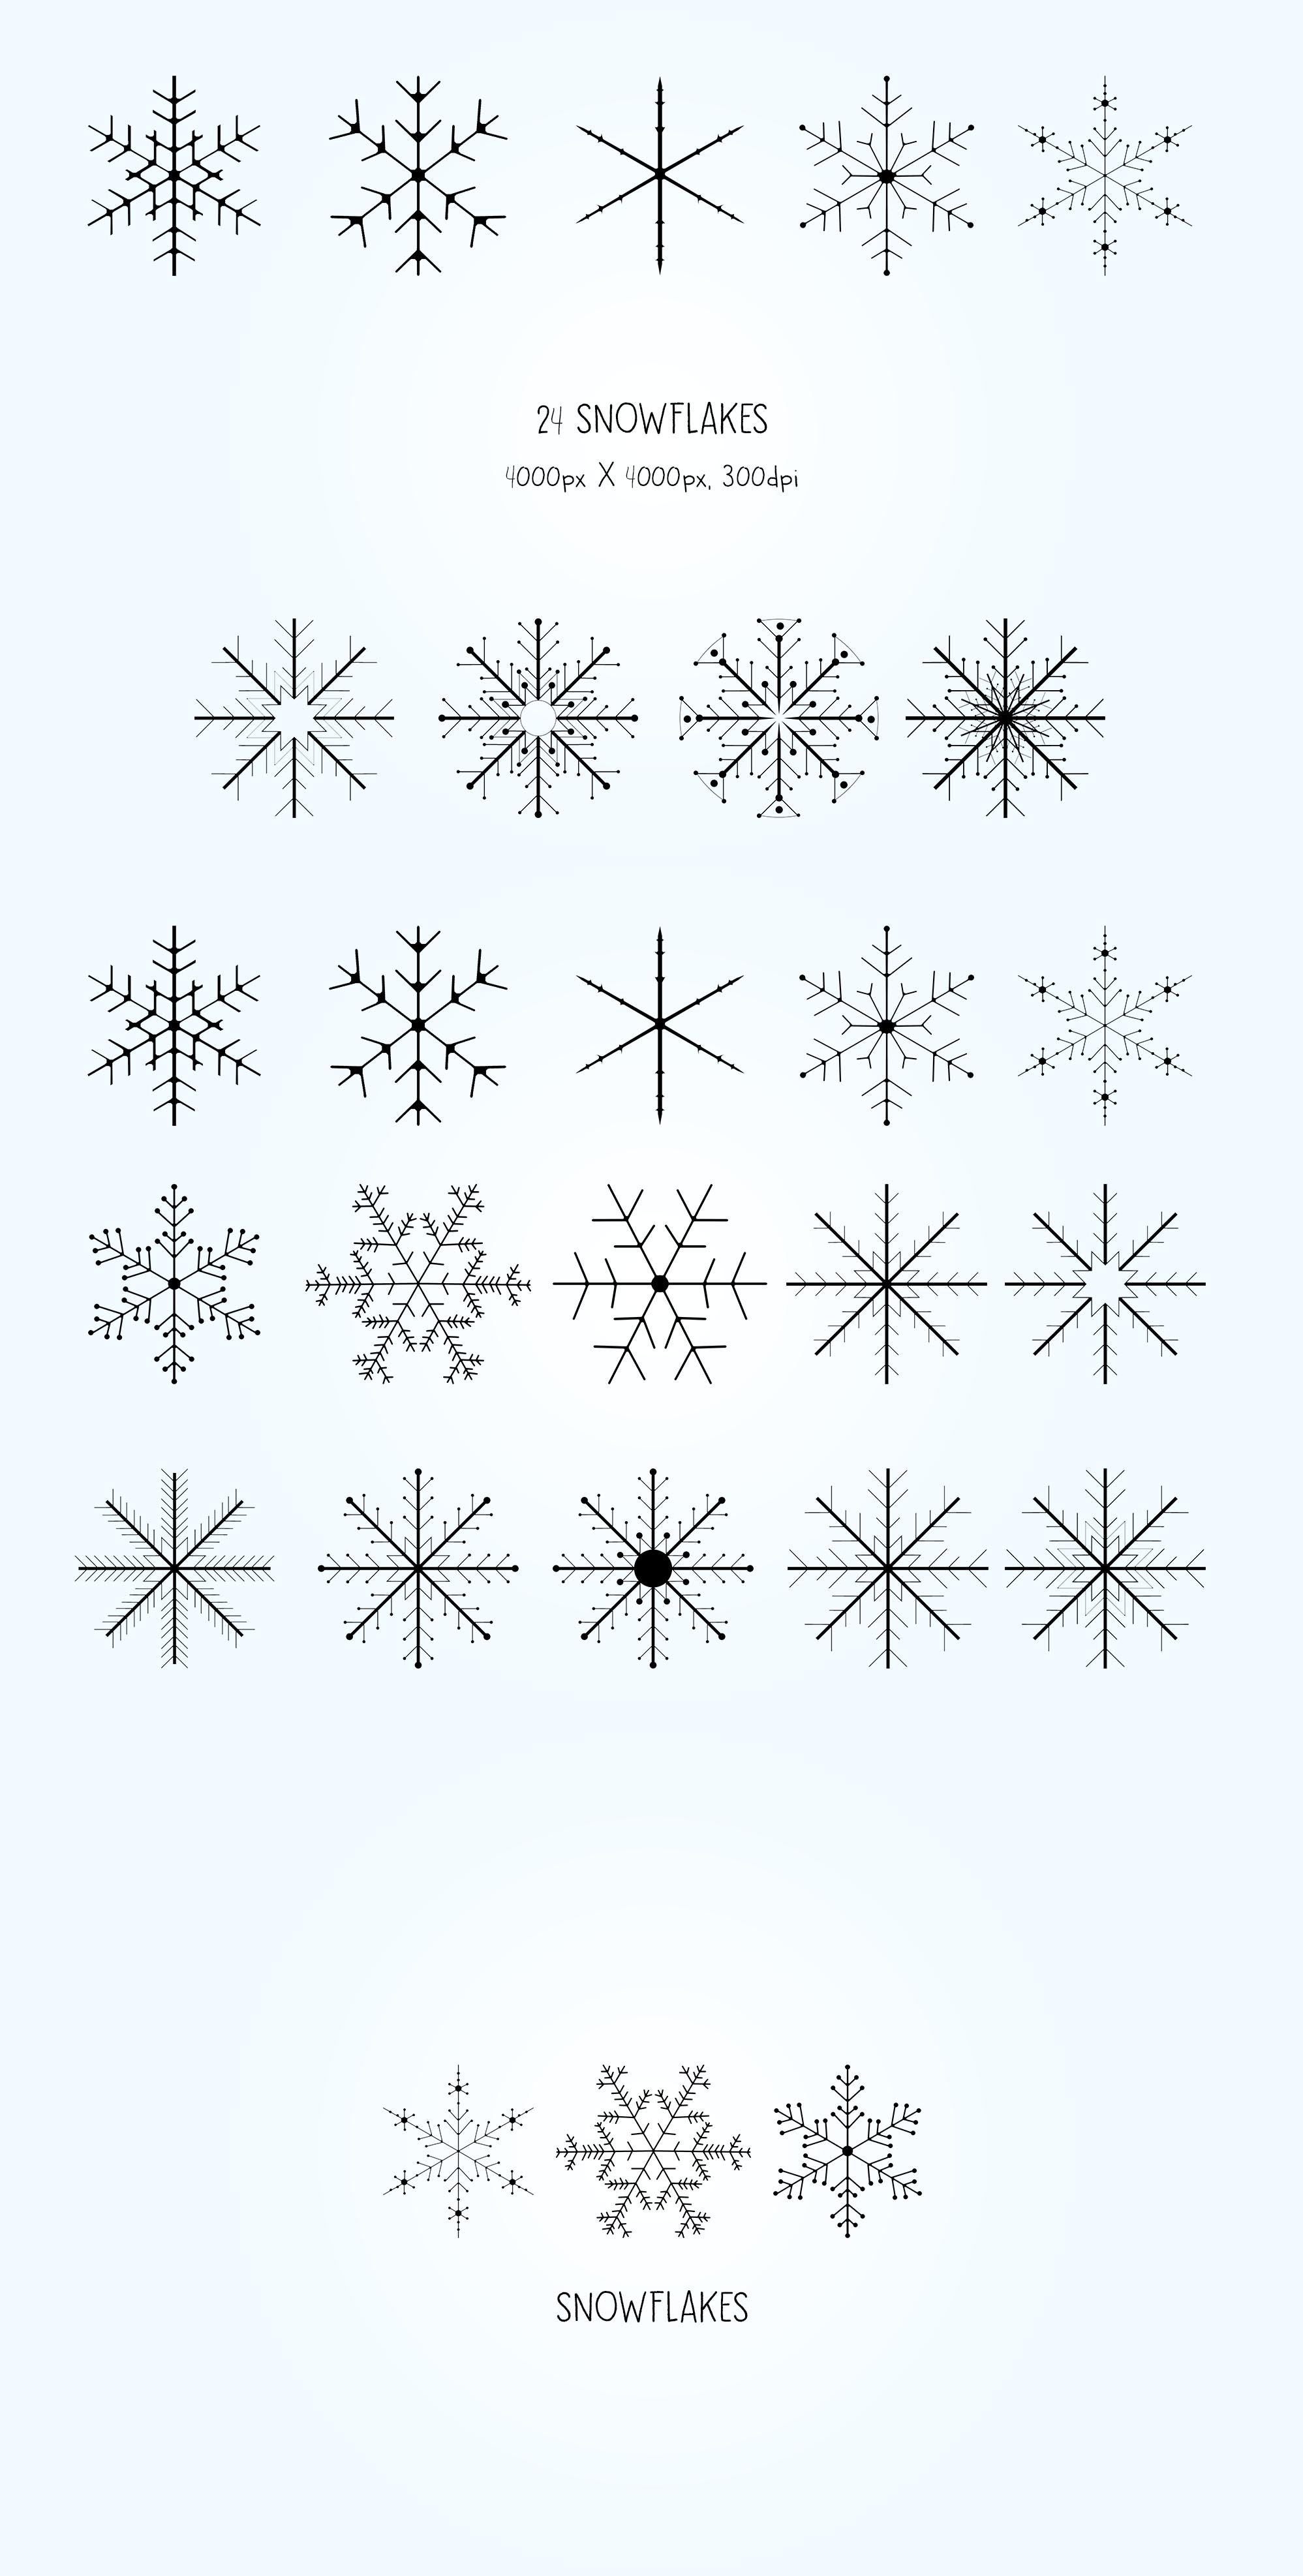 Snowflakes in different shapes for winter magic.